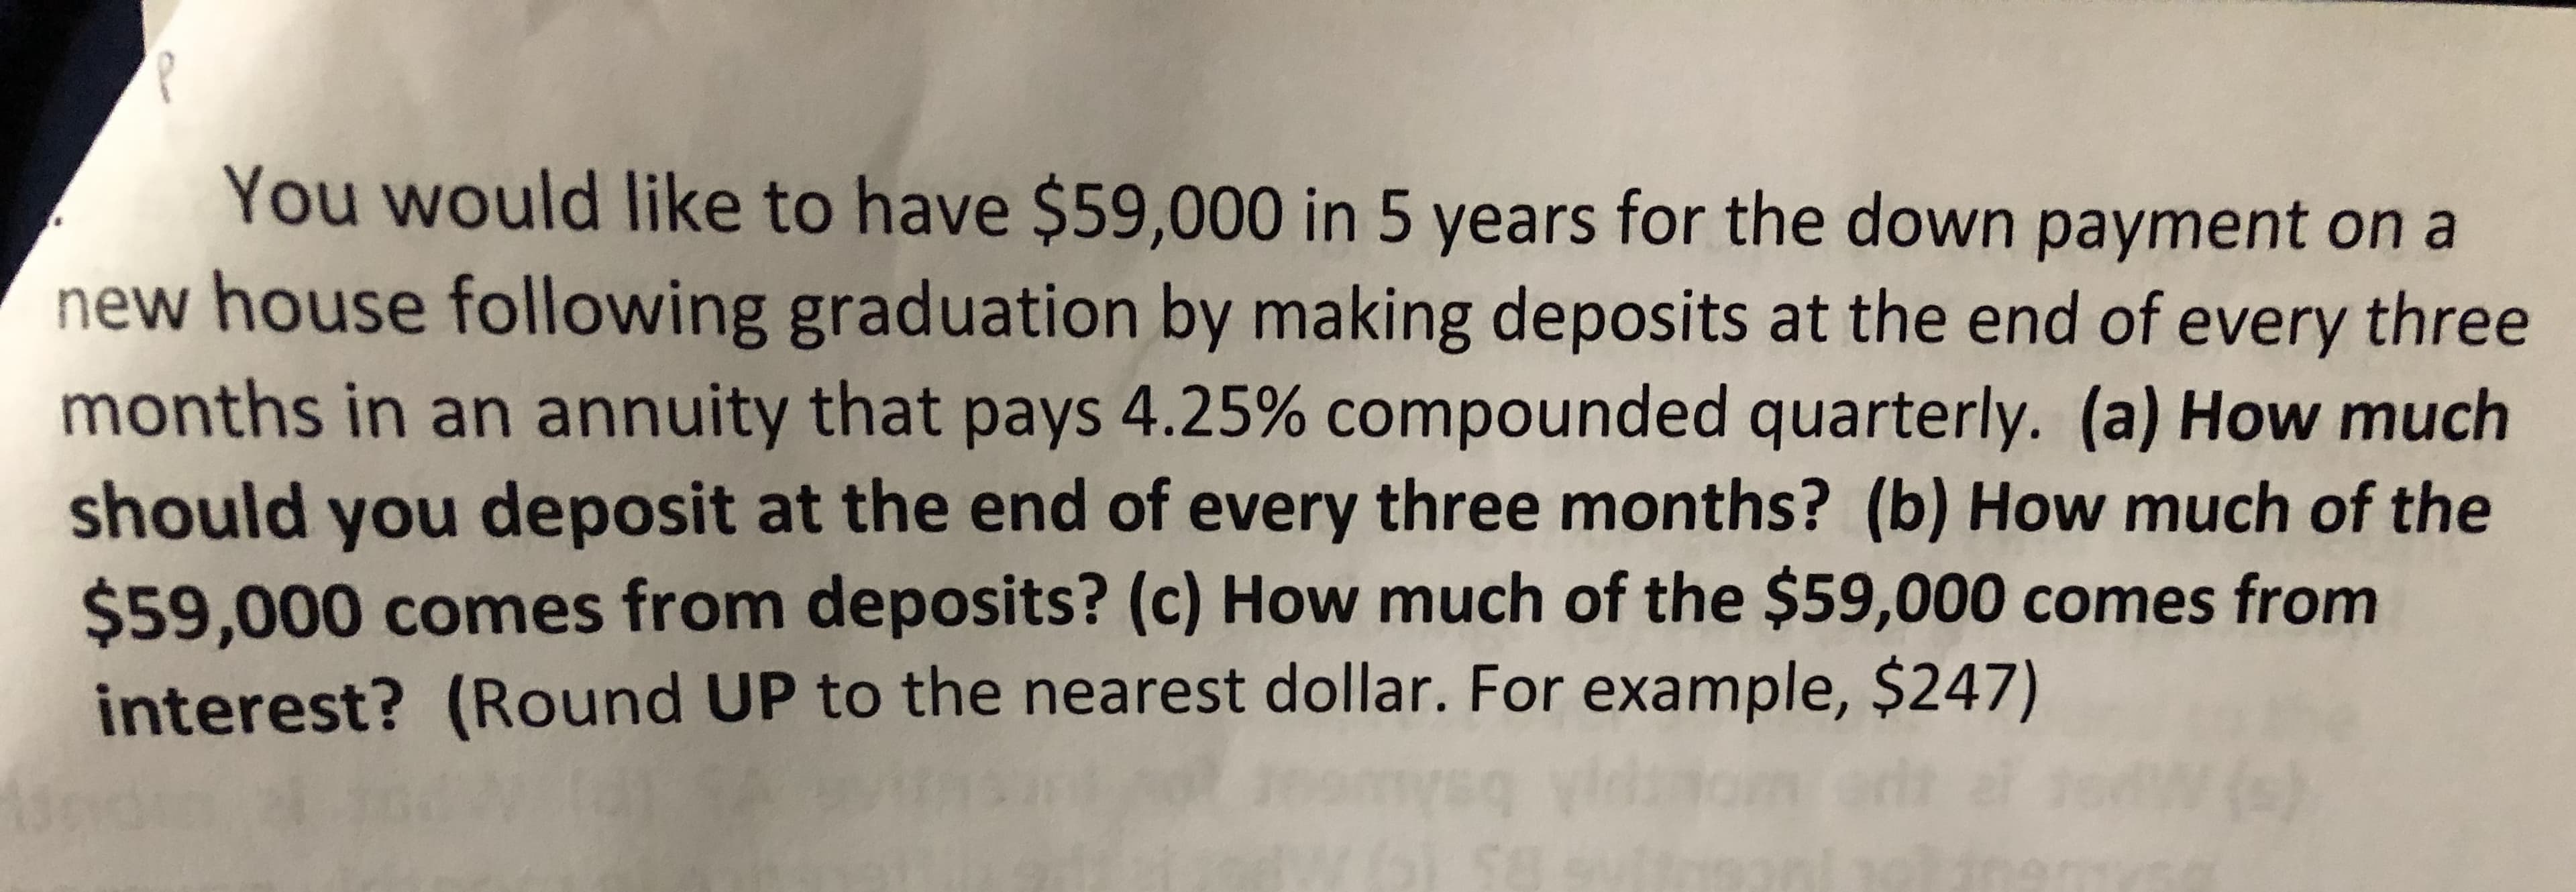 You would like to have $59,000 in 5 years for the down payment on a
new house following graduation by making deposits at the end of every three
months in an annuity that pays 4.25% compounded quarterly. (a) How much
should you deposit at the end of every three months? (b) How much of the
$59,000 comes from deposits? (c) How much of the $59,000 comes from
interest? (Round UP to the nearest dollar. For example, $247)
()
af
